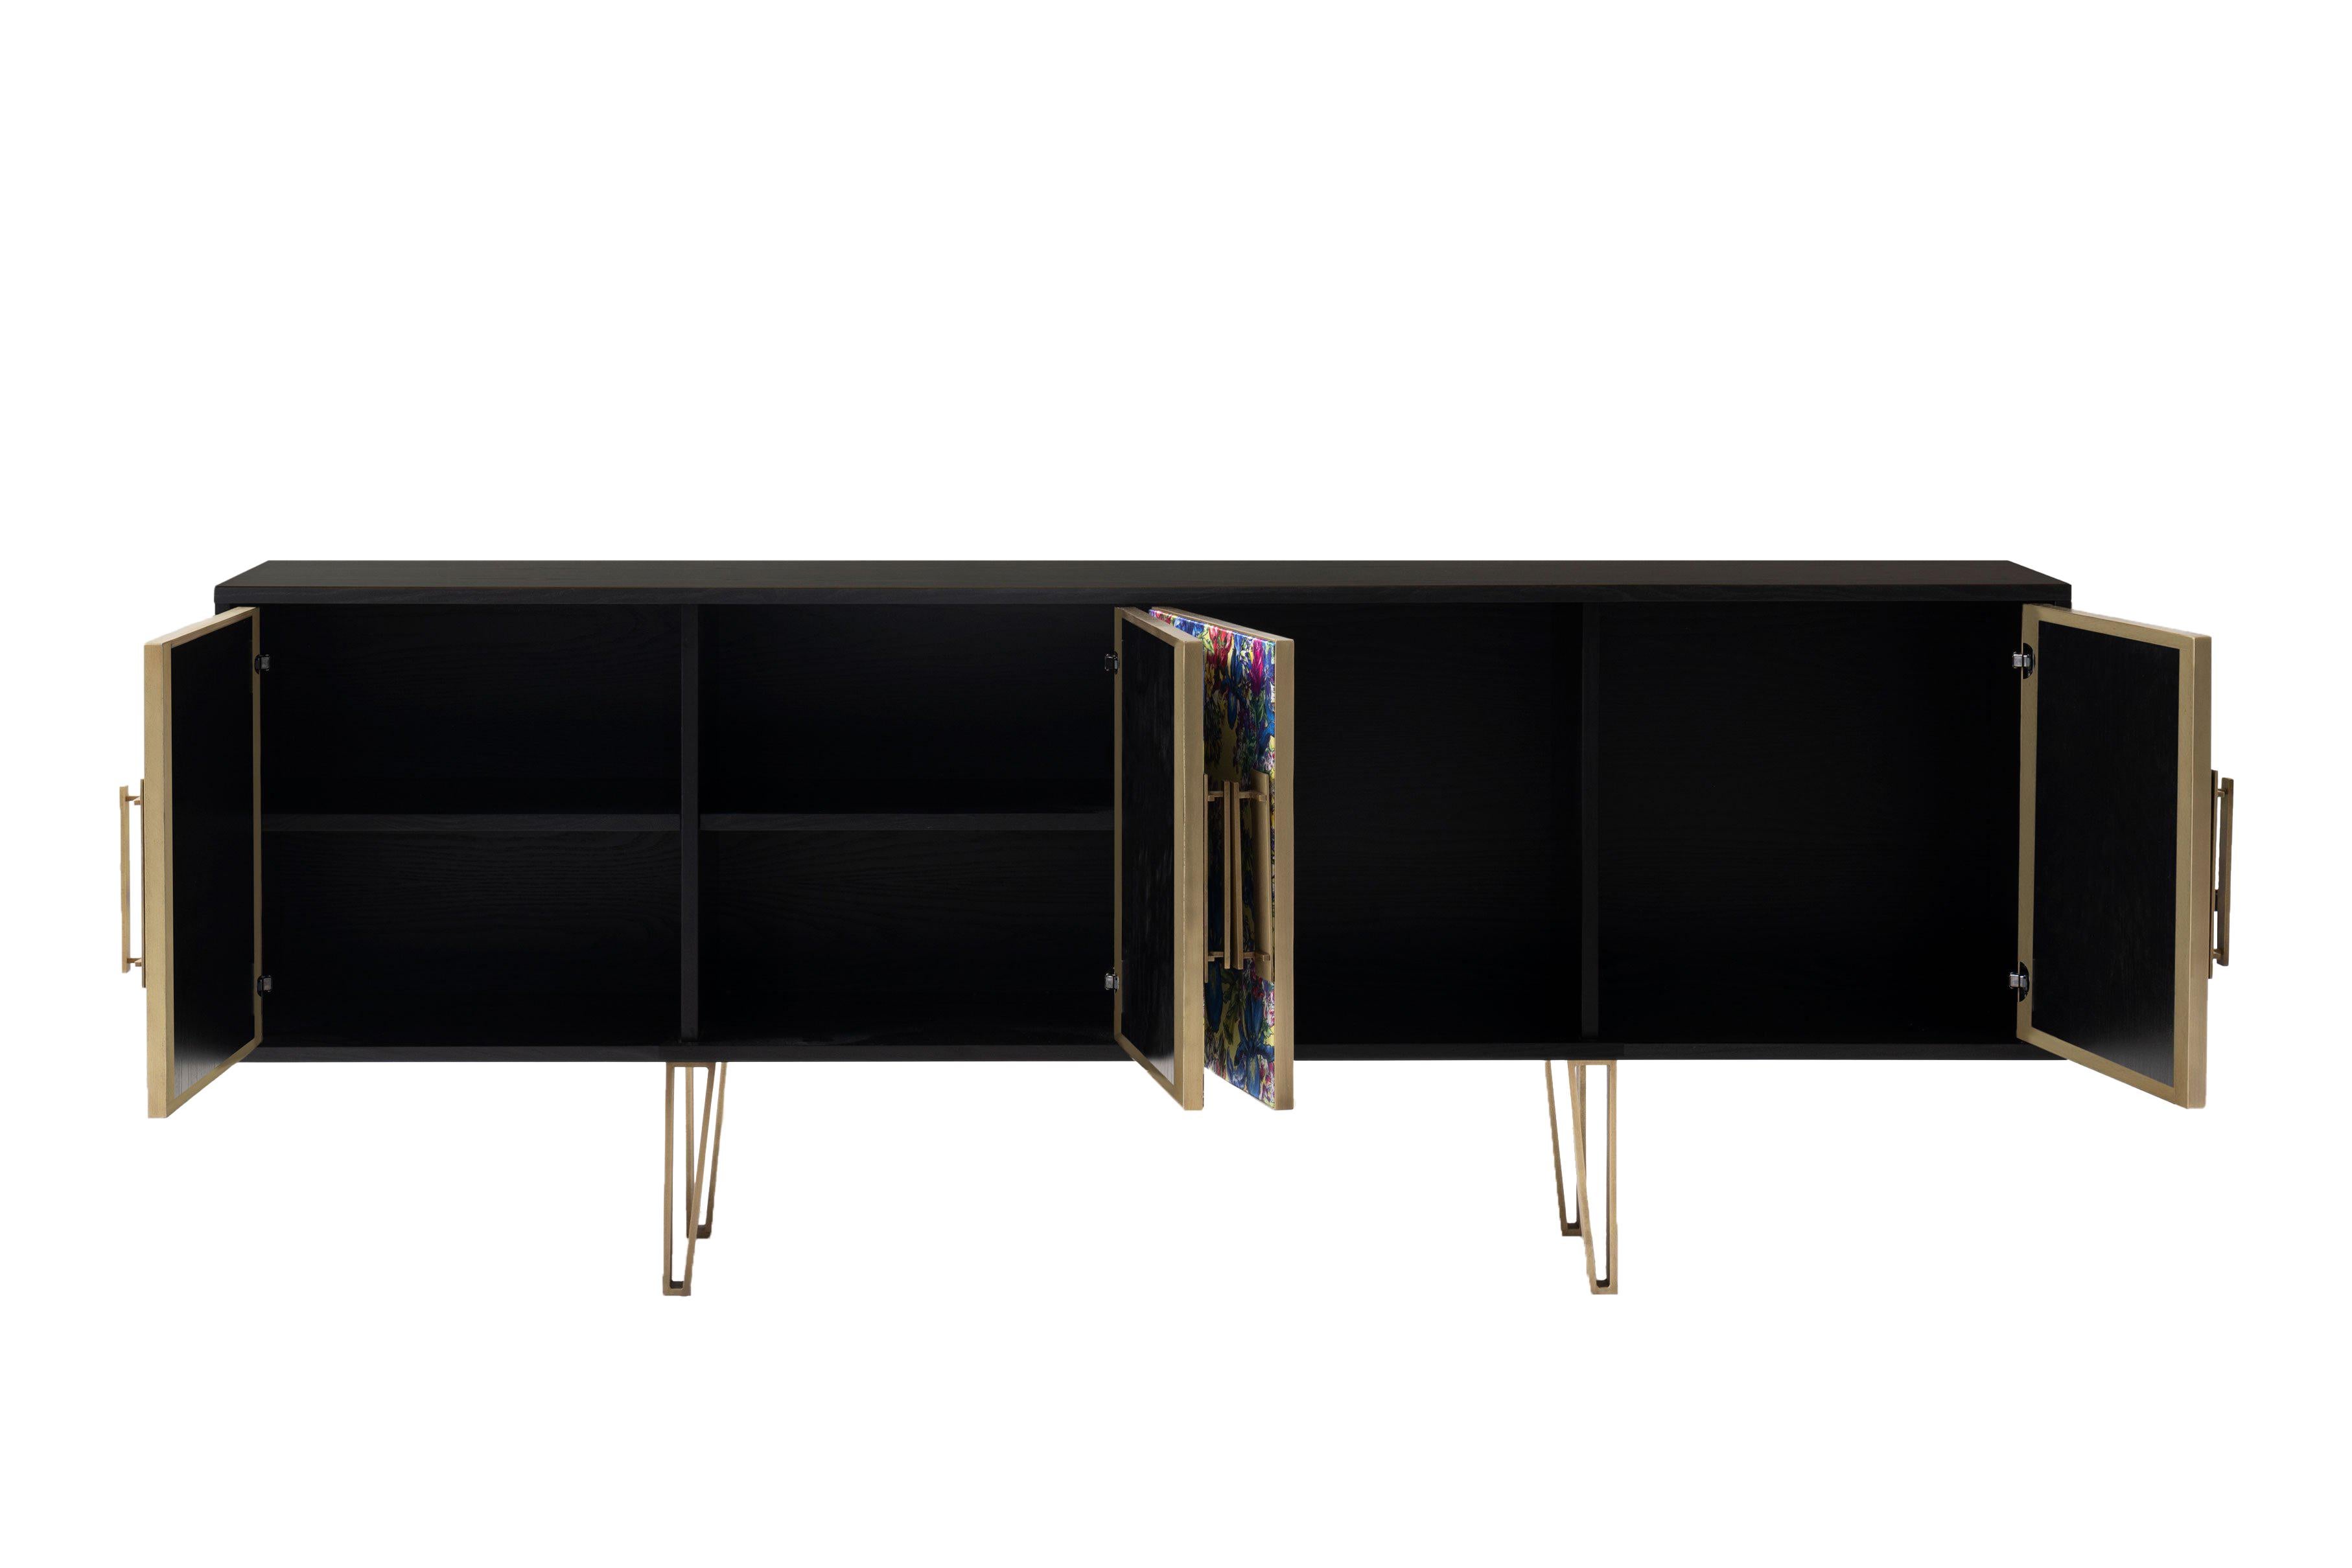 Upholstered FELDER FELDER’S stunning electric blue print, the Blake sideboard combines luxurious design with generous storage.

Handcrafted in England from lacquered oakwood veneers, this statement piece is fine upholstered in sumptuous silk-blend